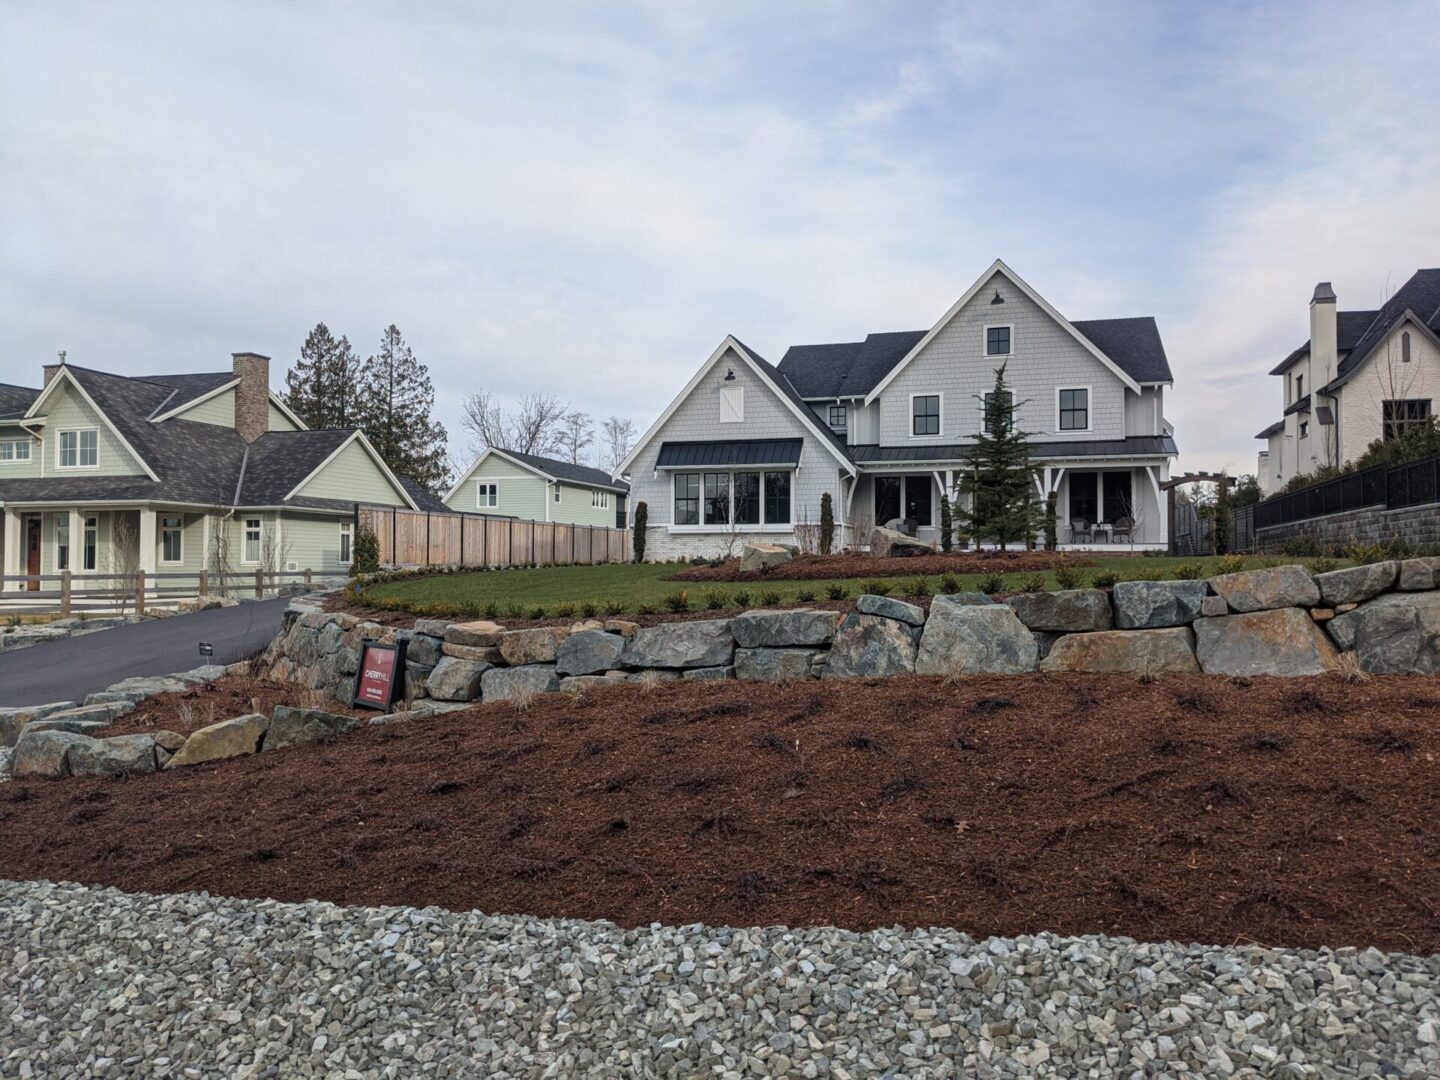 Newly landscaped suburban area with mulch and stone retaining wall, featuring a large white house and adjacent structures under an overcast sky.